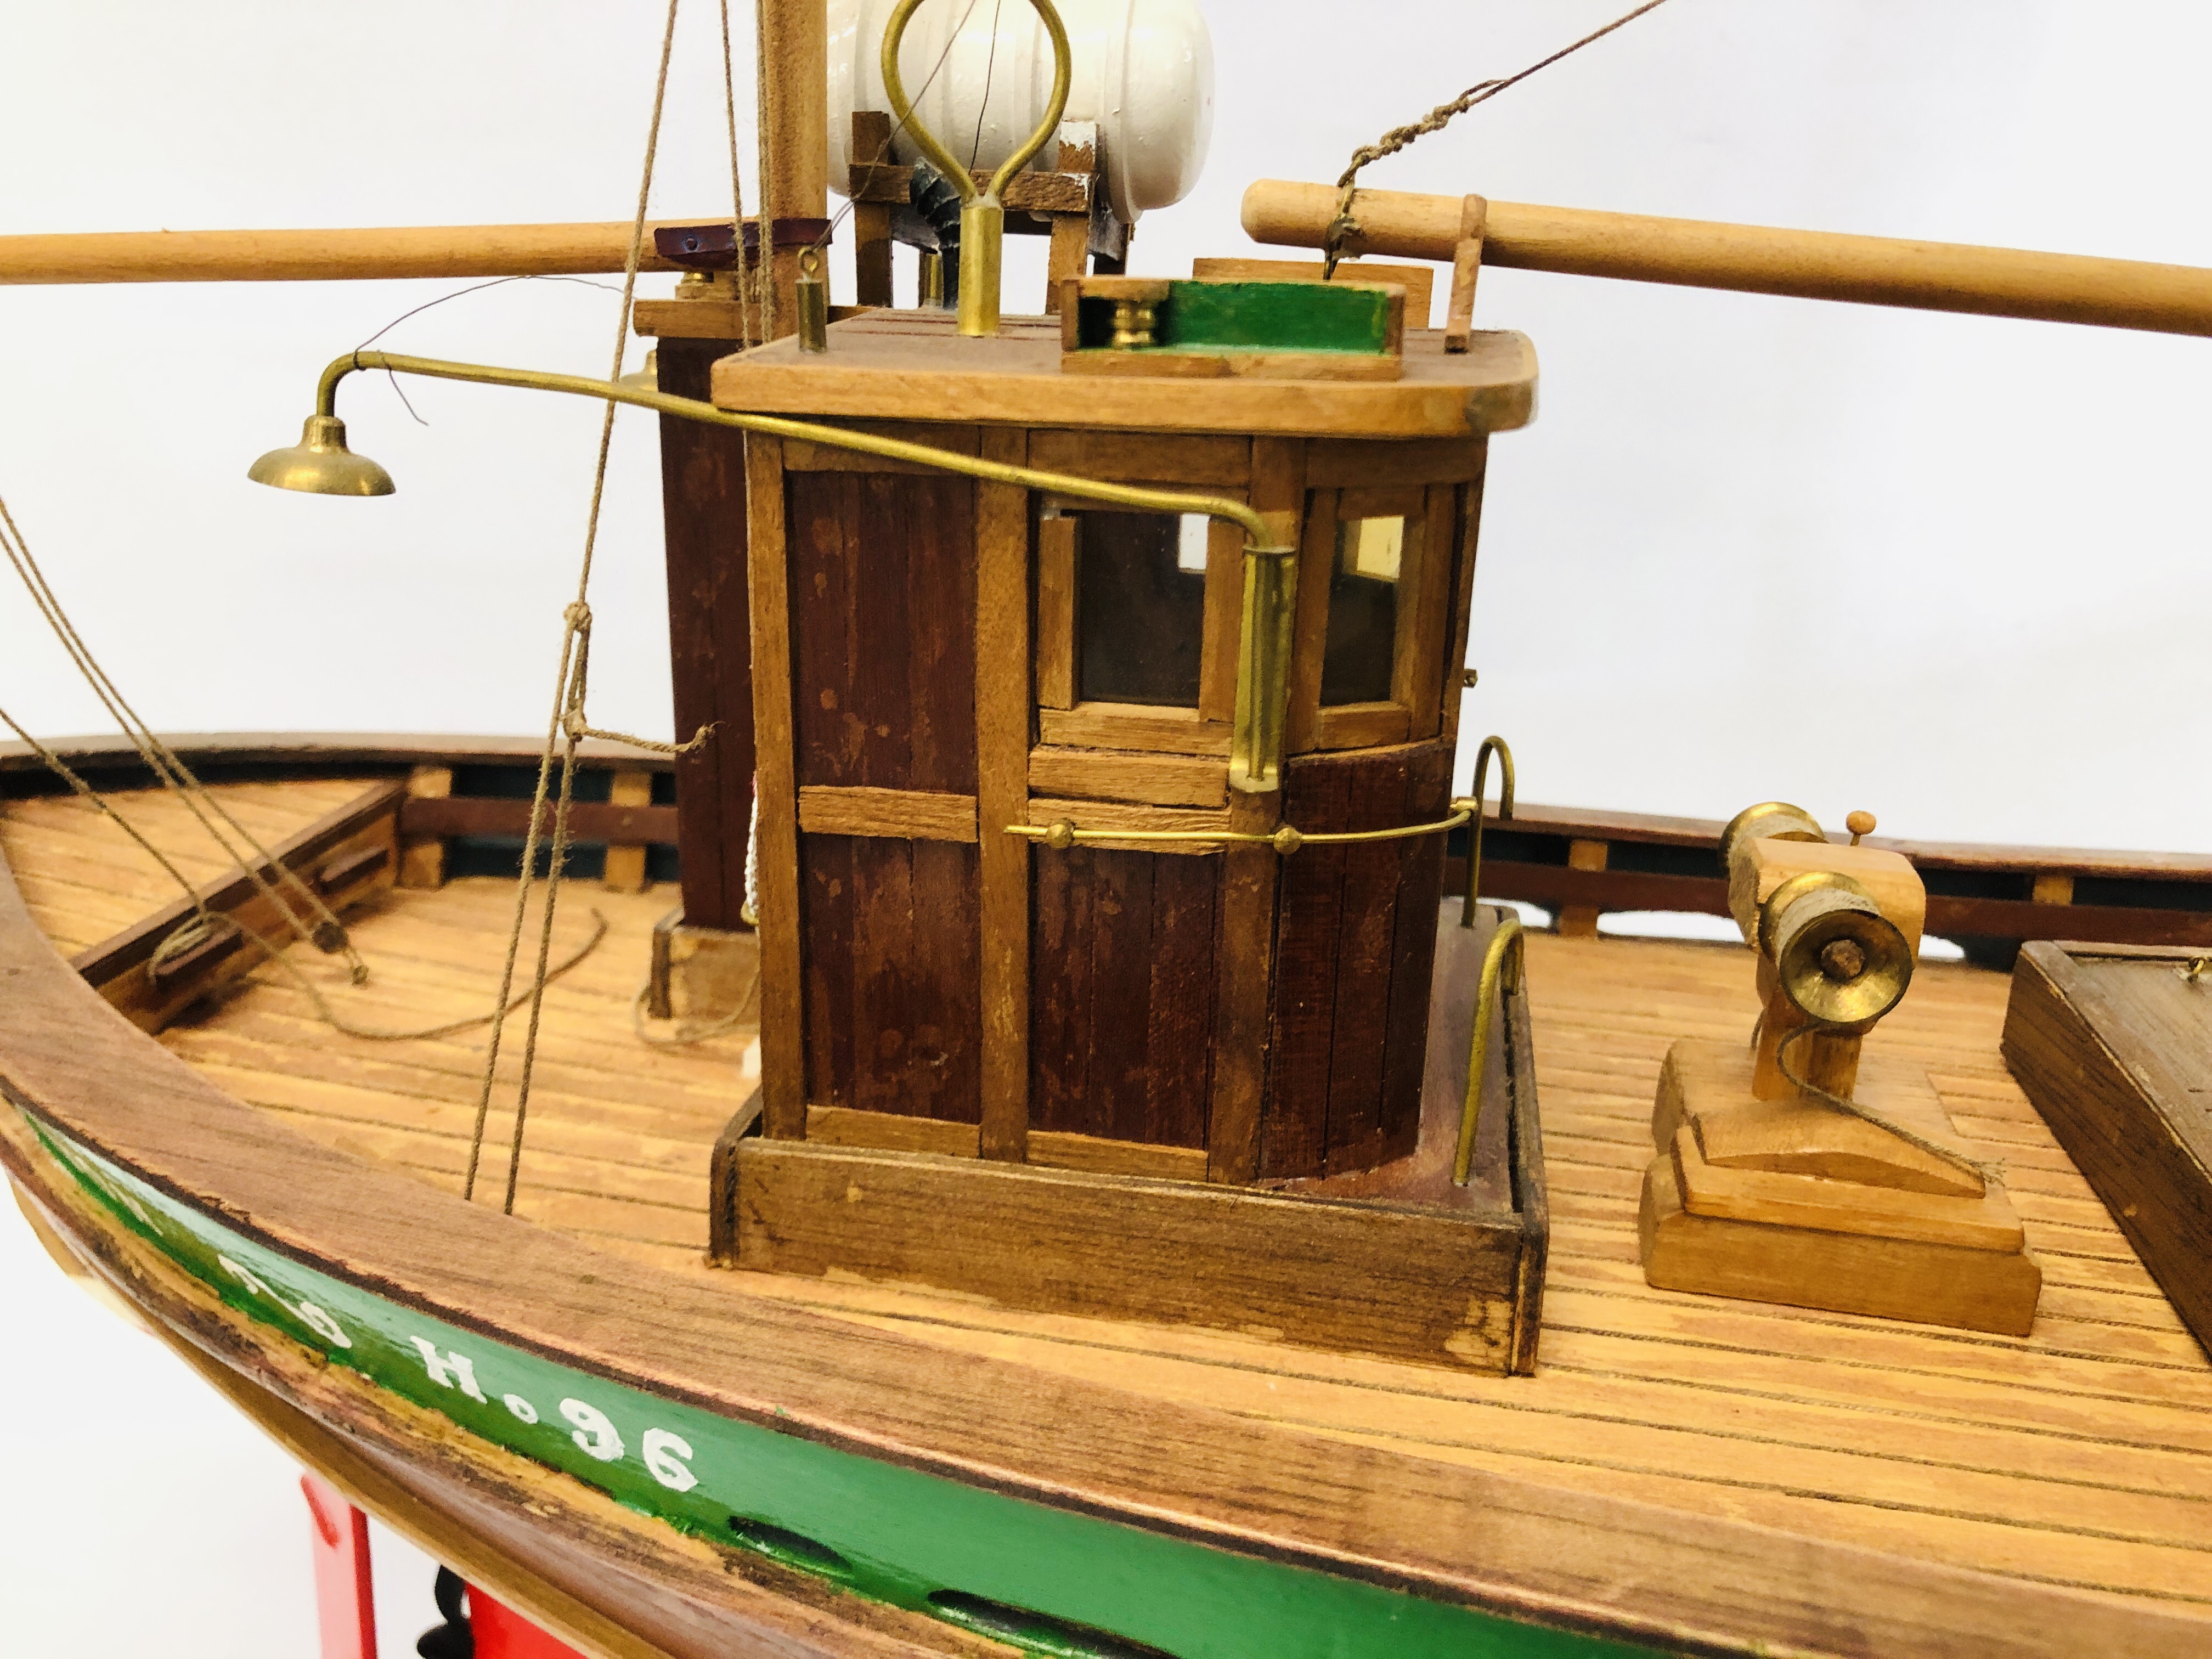 A VINTAGE HAND BUILT WOODEN MODEL OF A FISHING TRAWLER "EILEEN" NO. 96 LENGTH 85CM. HEIGHT 66CM. - Image 11 of 11